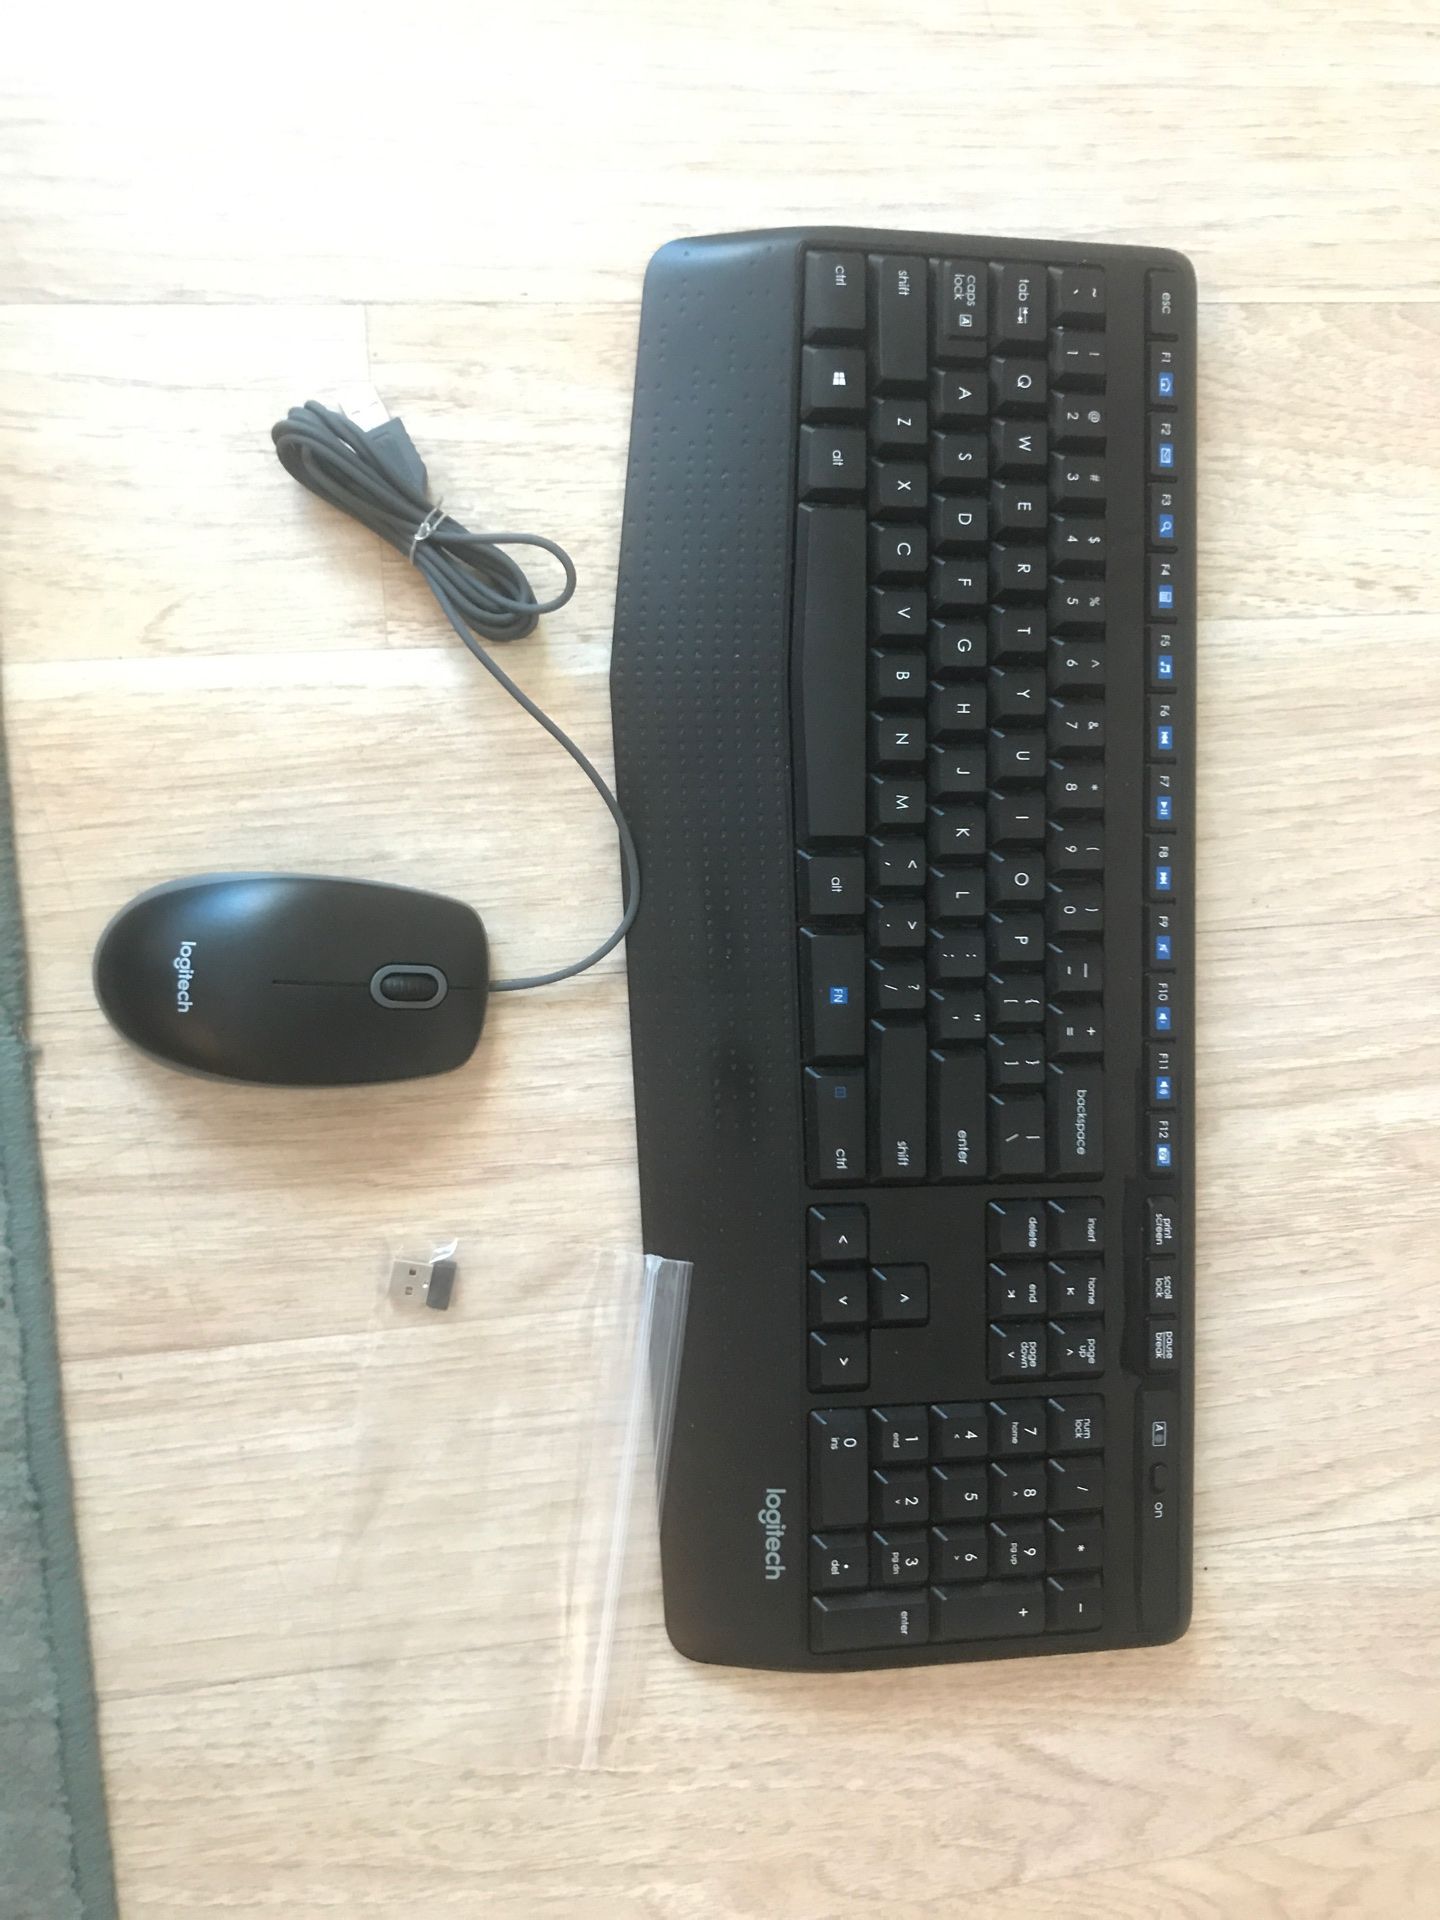 Wireless Logitech keyboard & wired corded mouse - sold together or separately very gently used